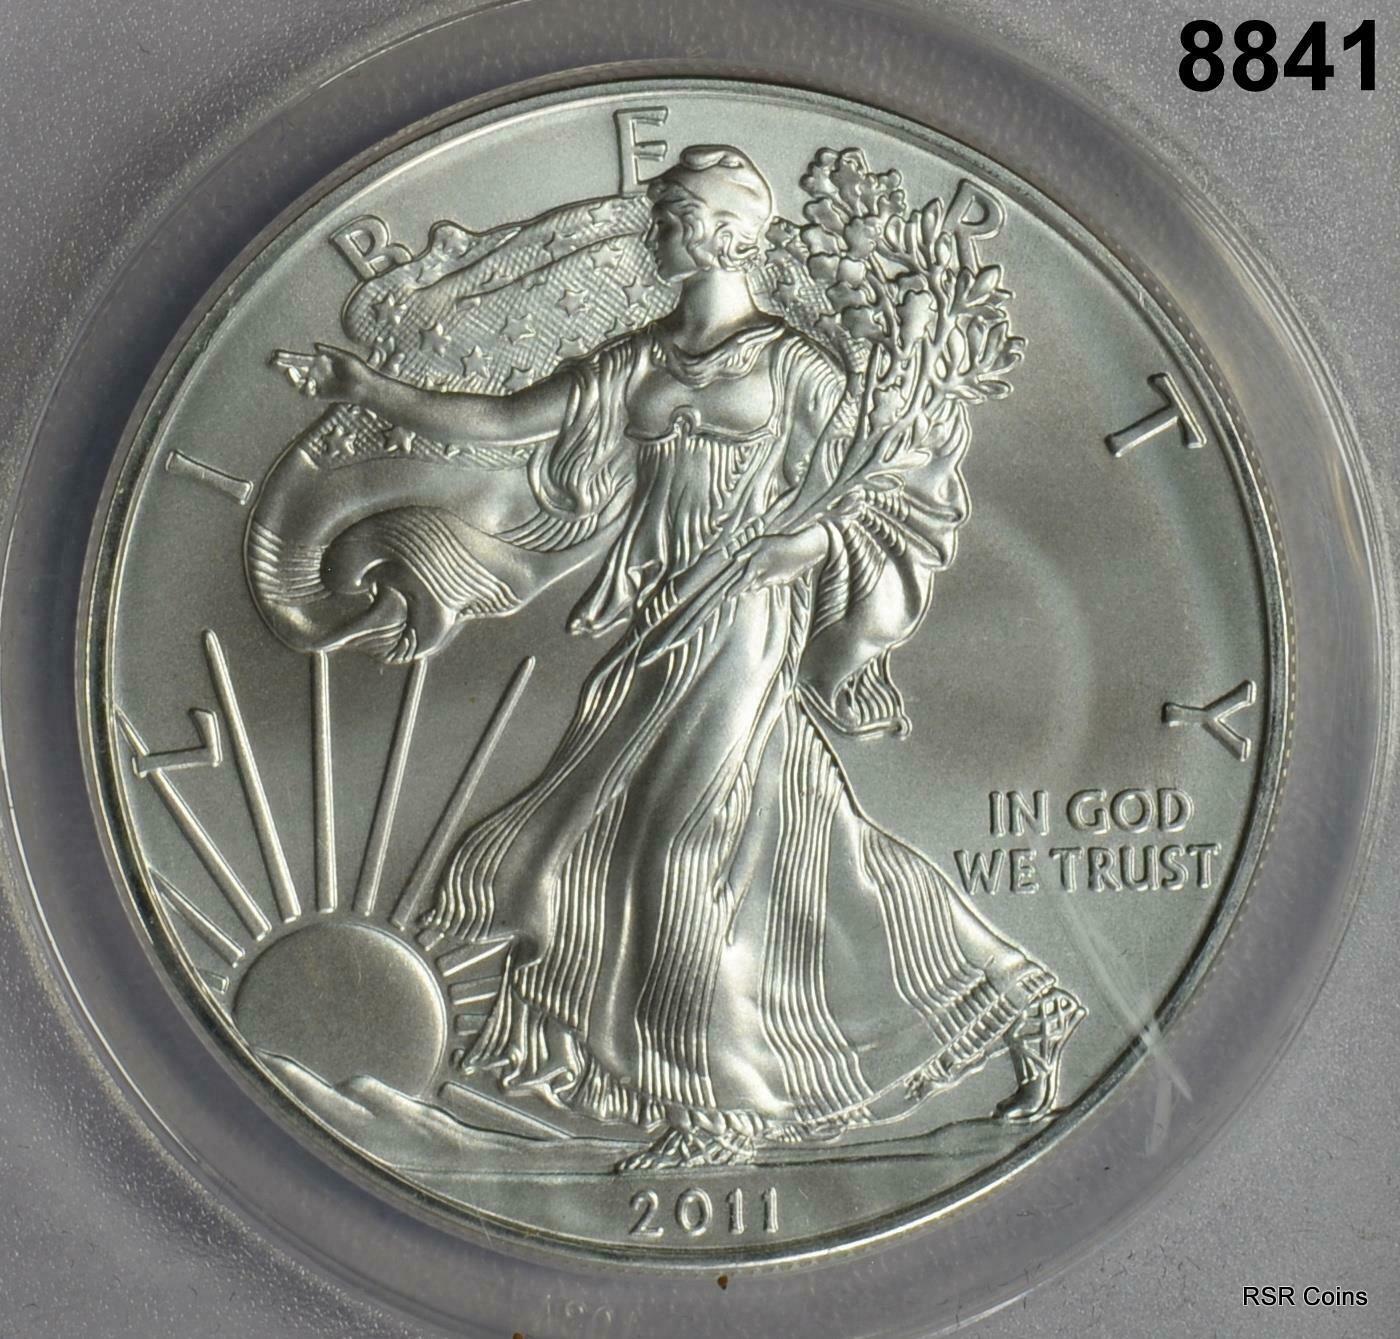 2010 & 2011 ANACS CERTIFIED SILVER EAGLE 2 COIN SET #8841